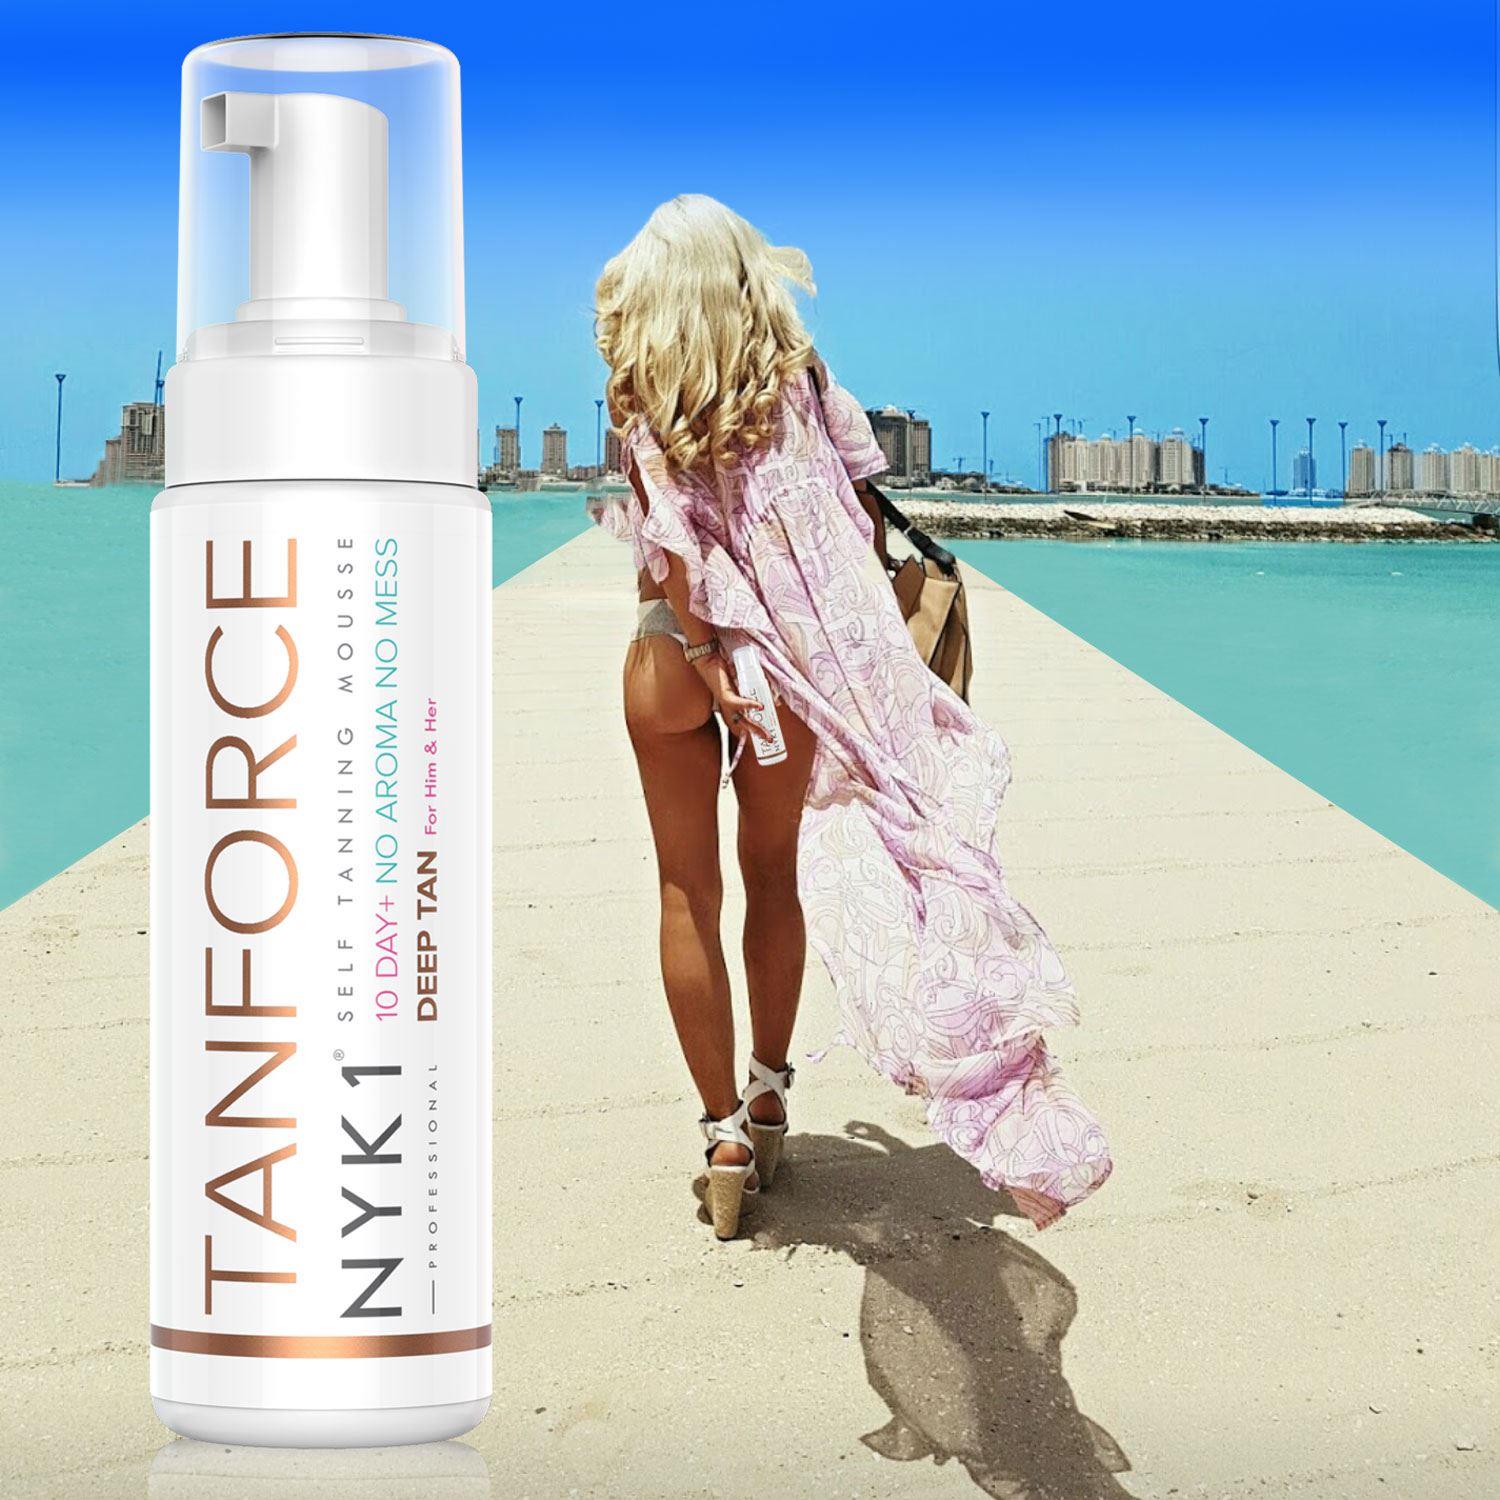 NYK1 Tan Force Self Tan Cream Mousse, no stain Tanning